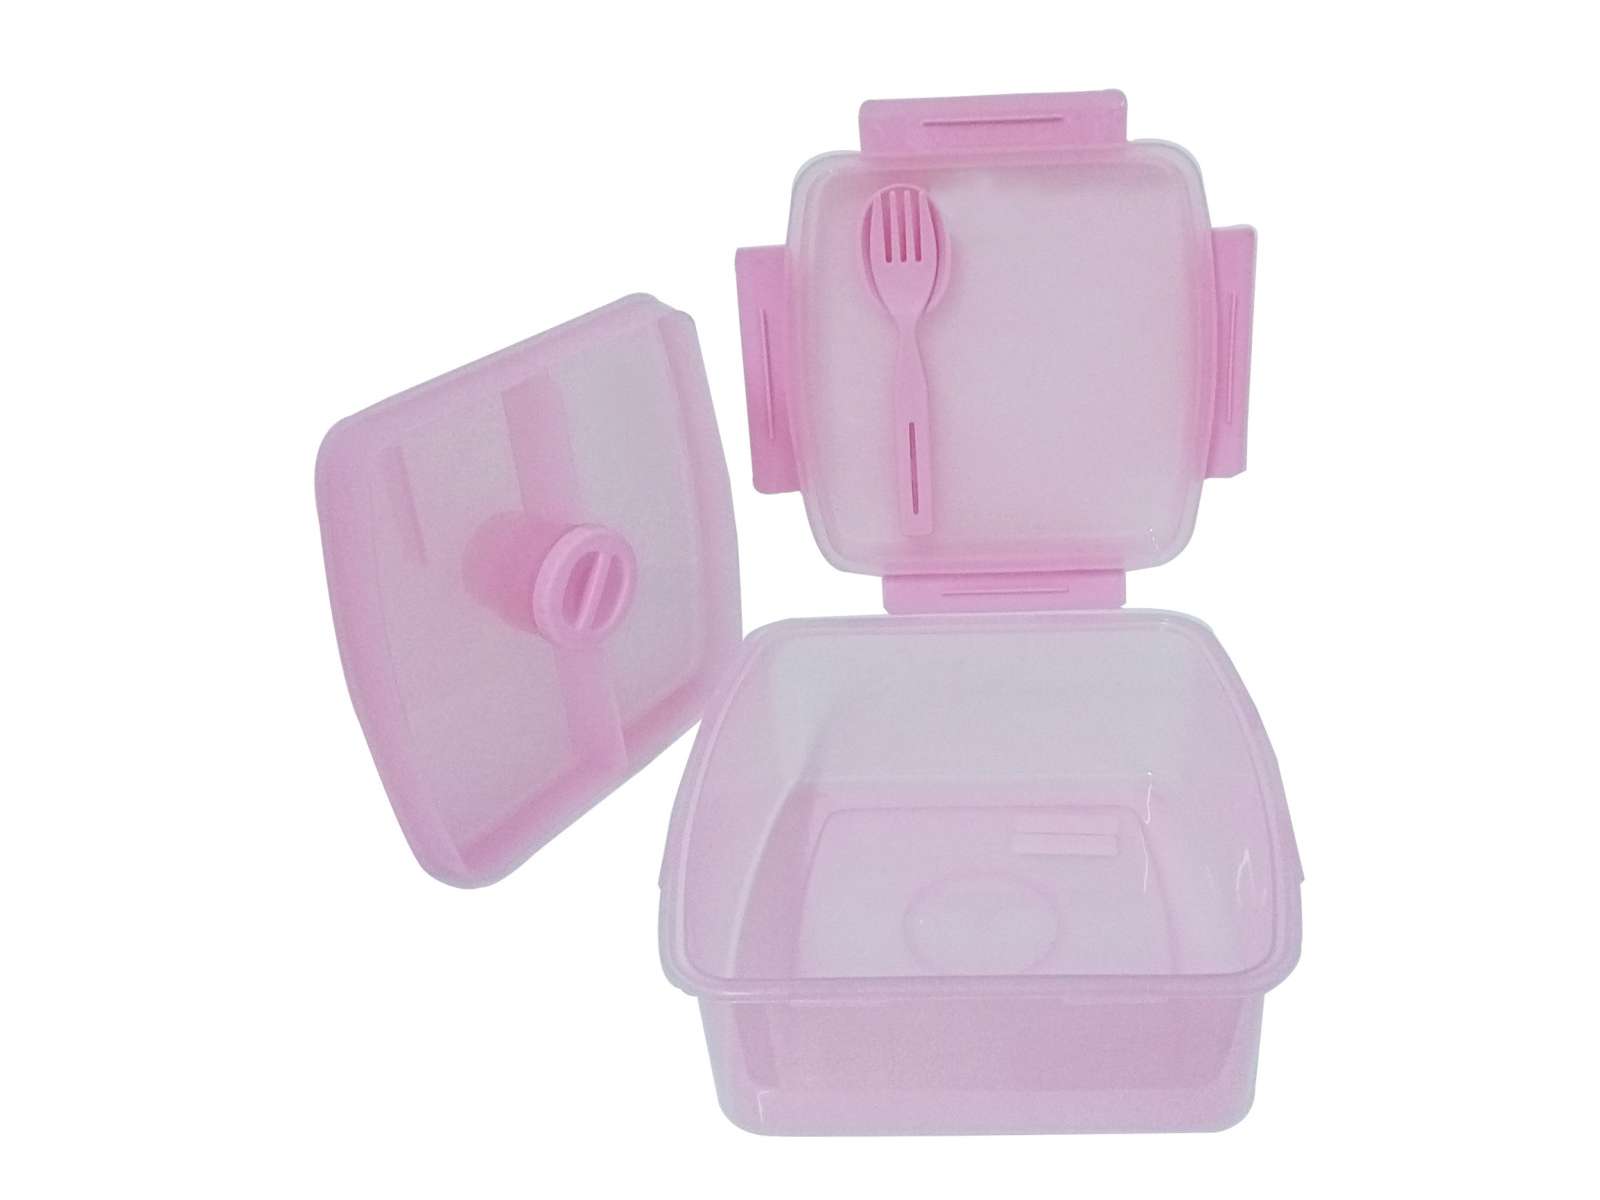 Square lunch box (utensil & sauce pot included)